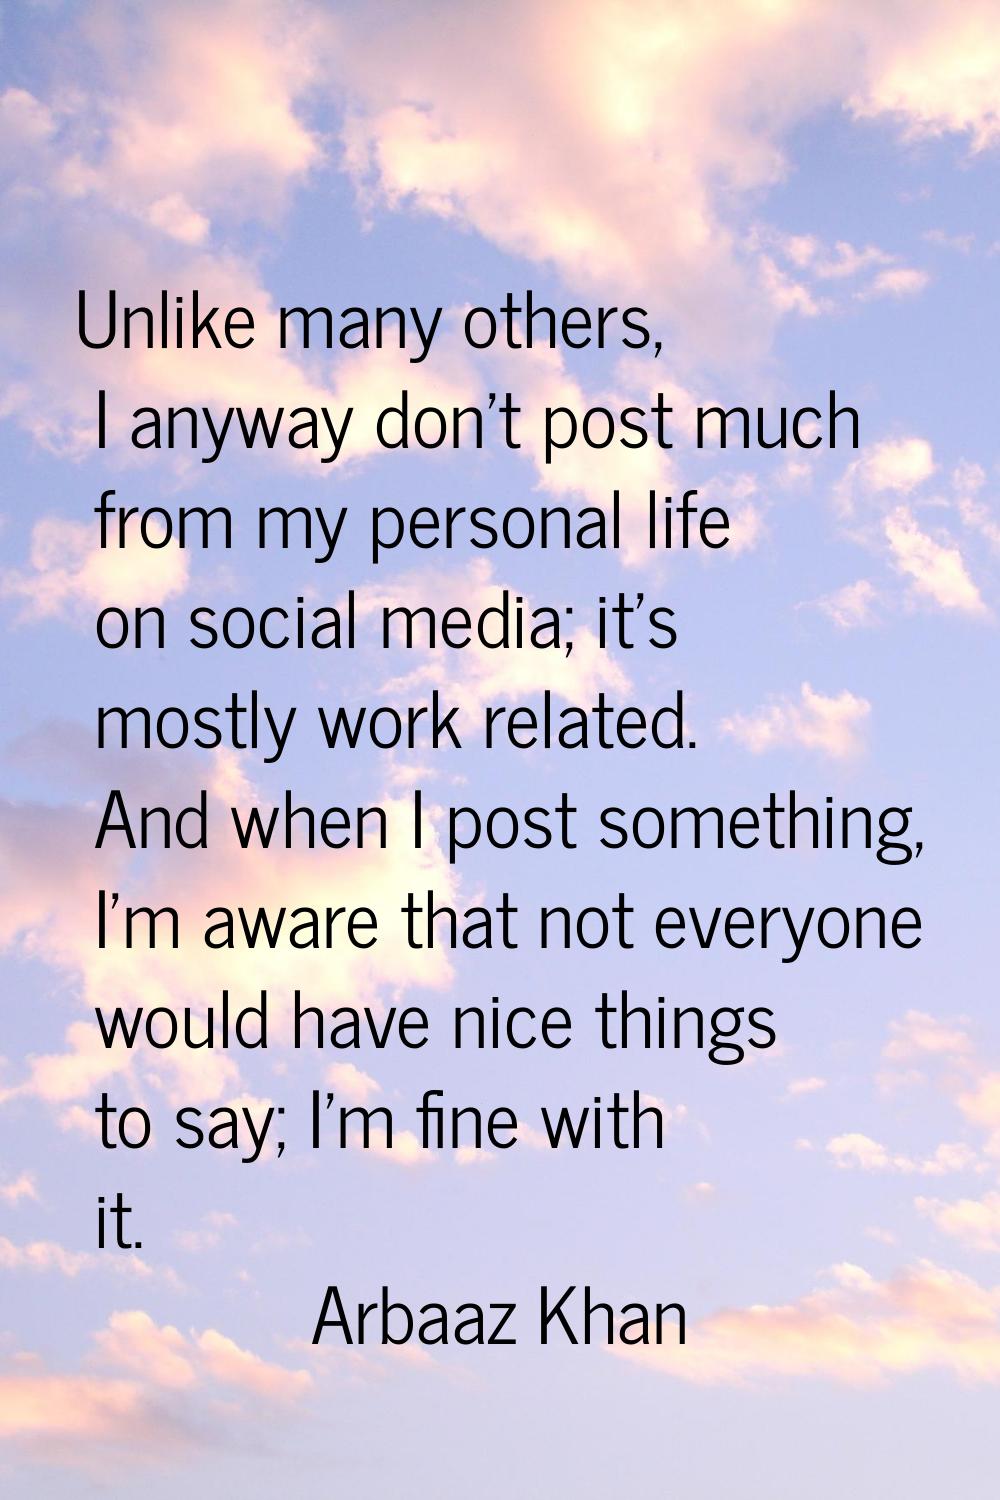 Unlike many others, I anyway don't post much from my personal life on social media; it's mostly wor